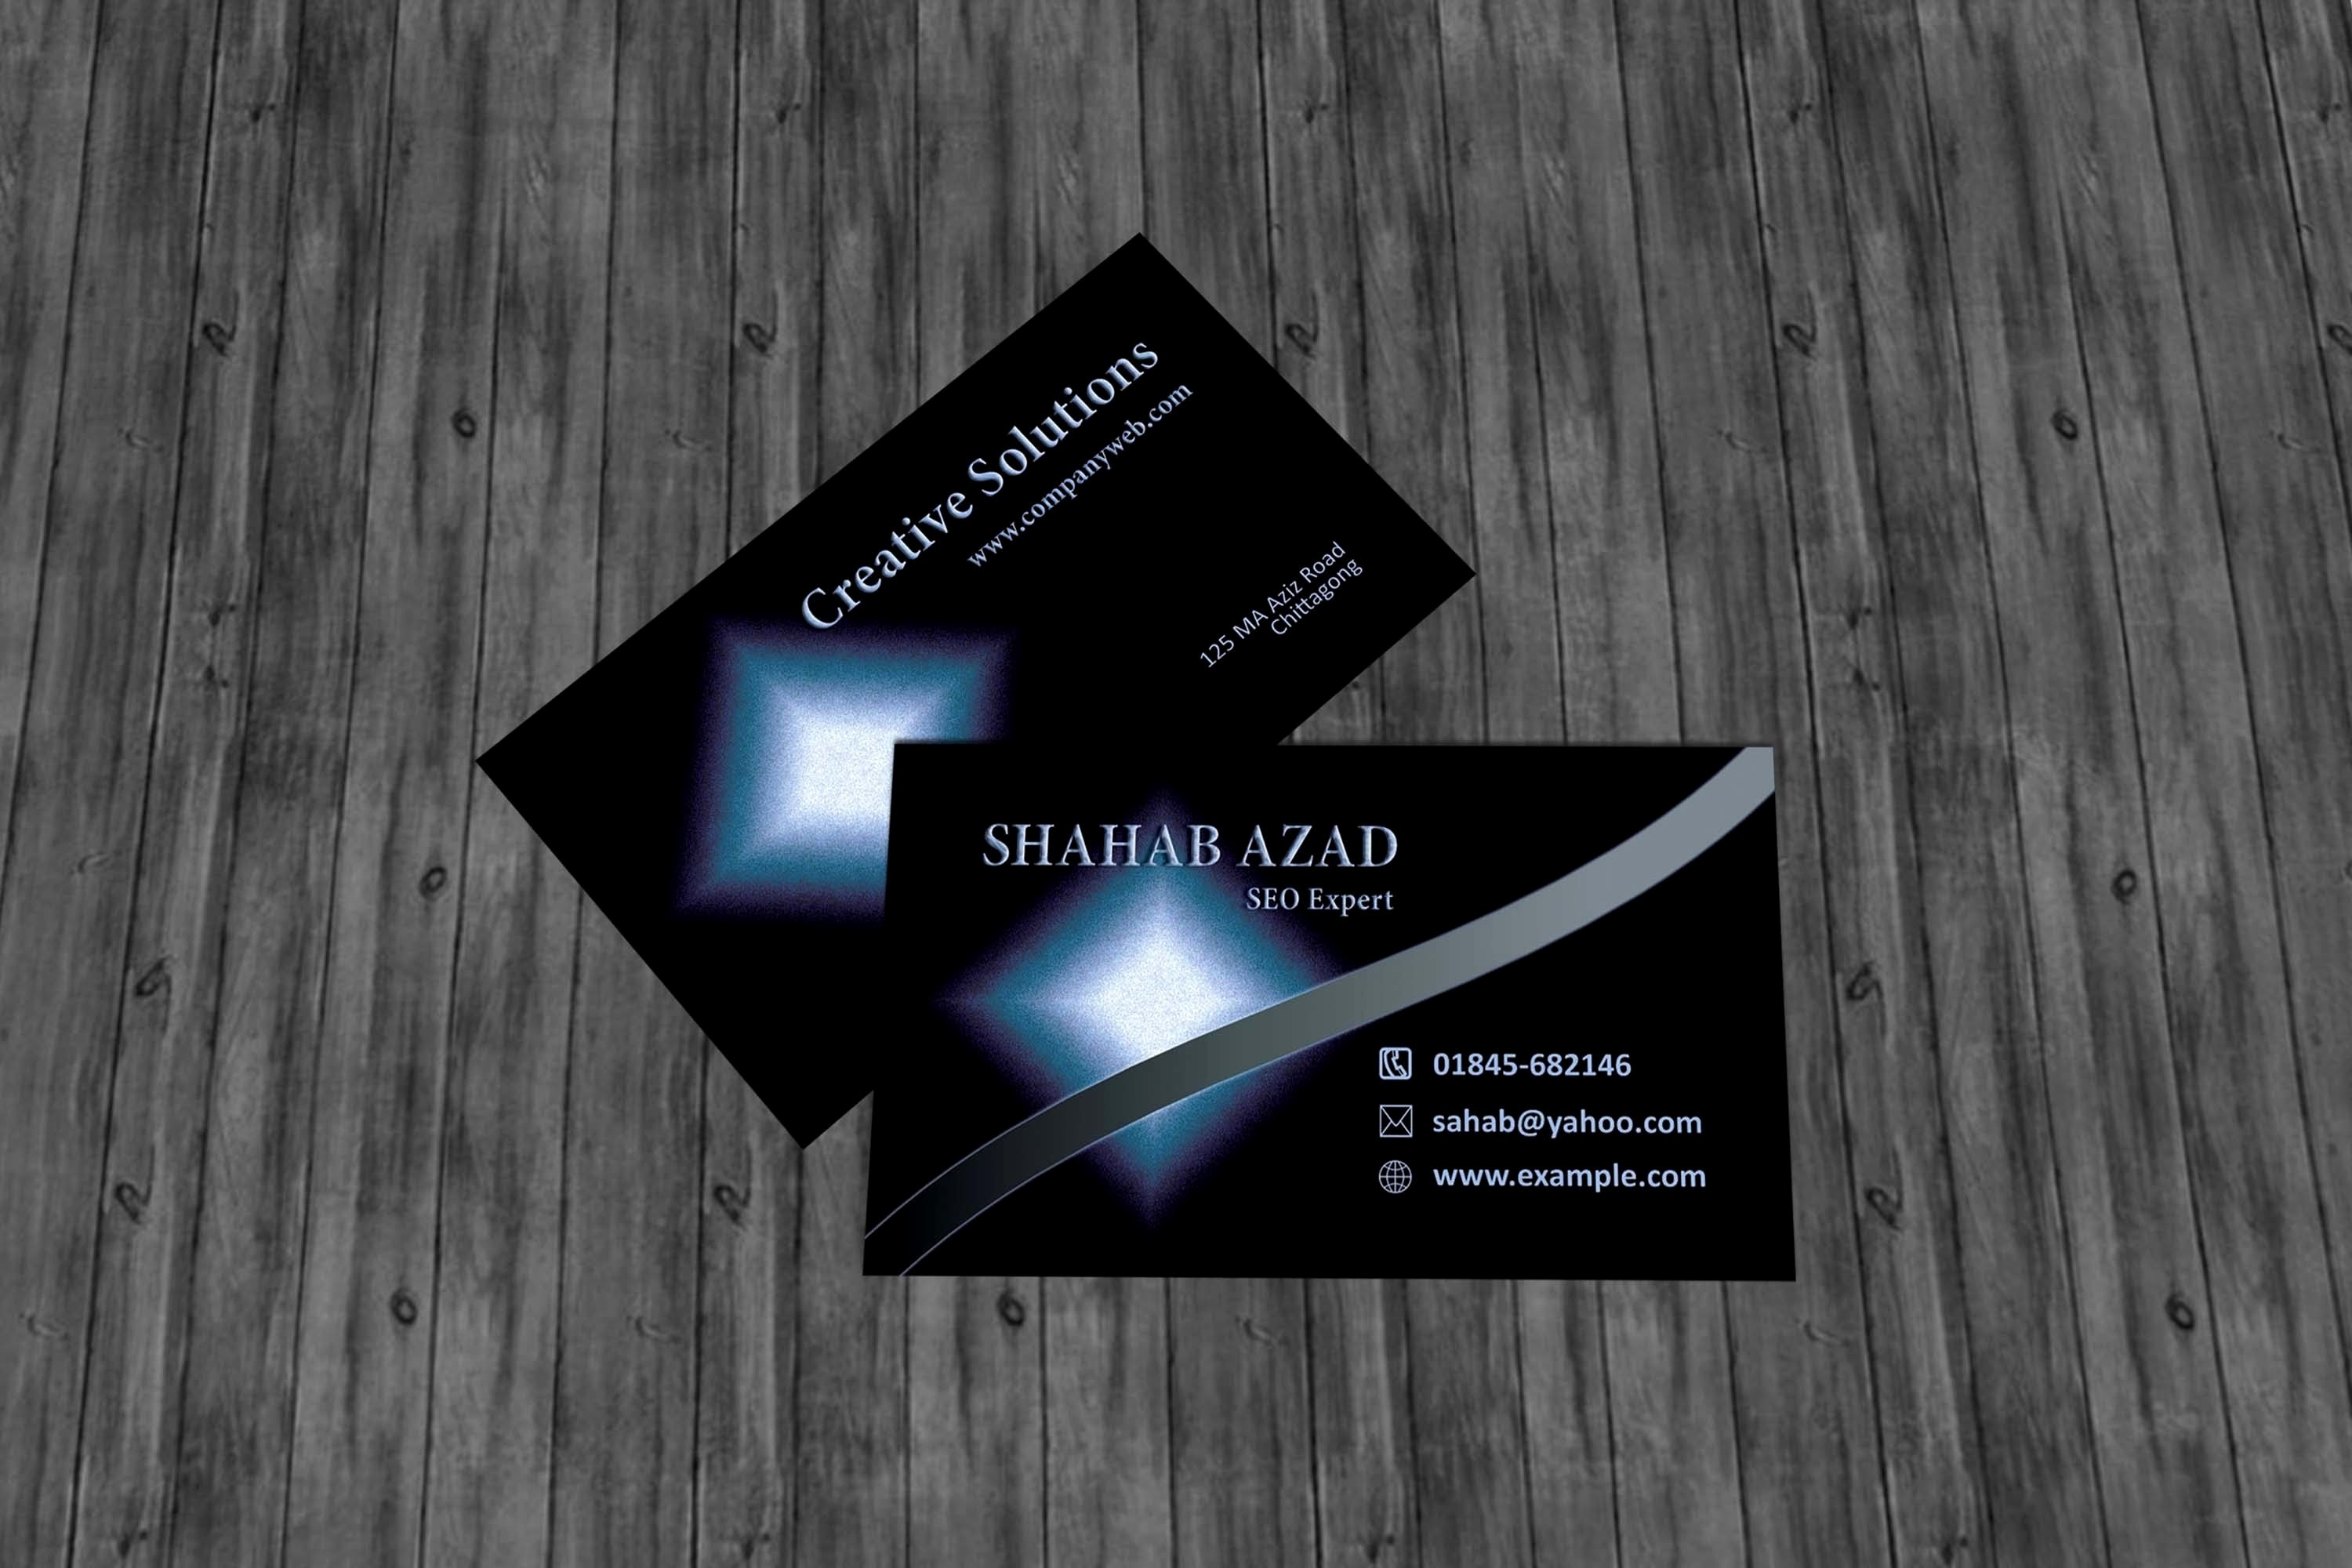 Photoshop Cs6 Business Card Template Intended For Photoshop Cs6 Business Card Template